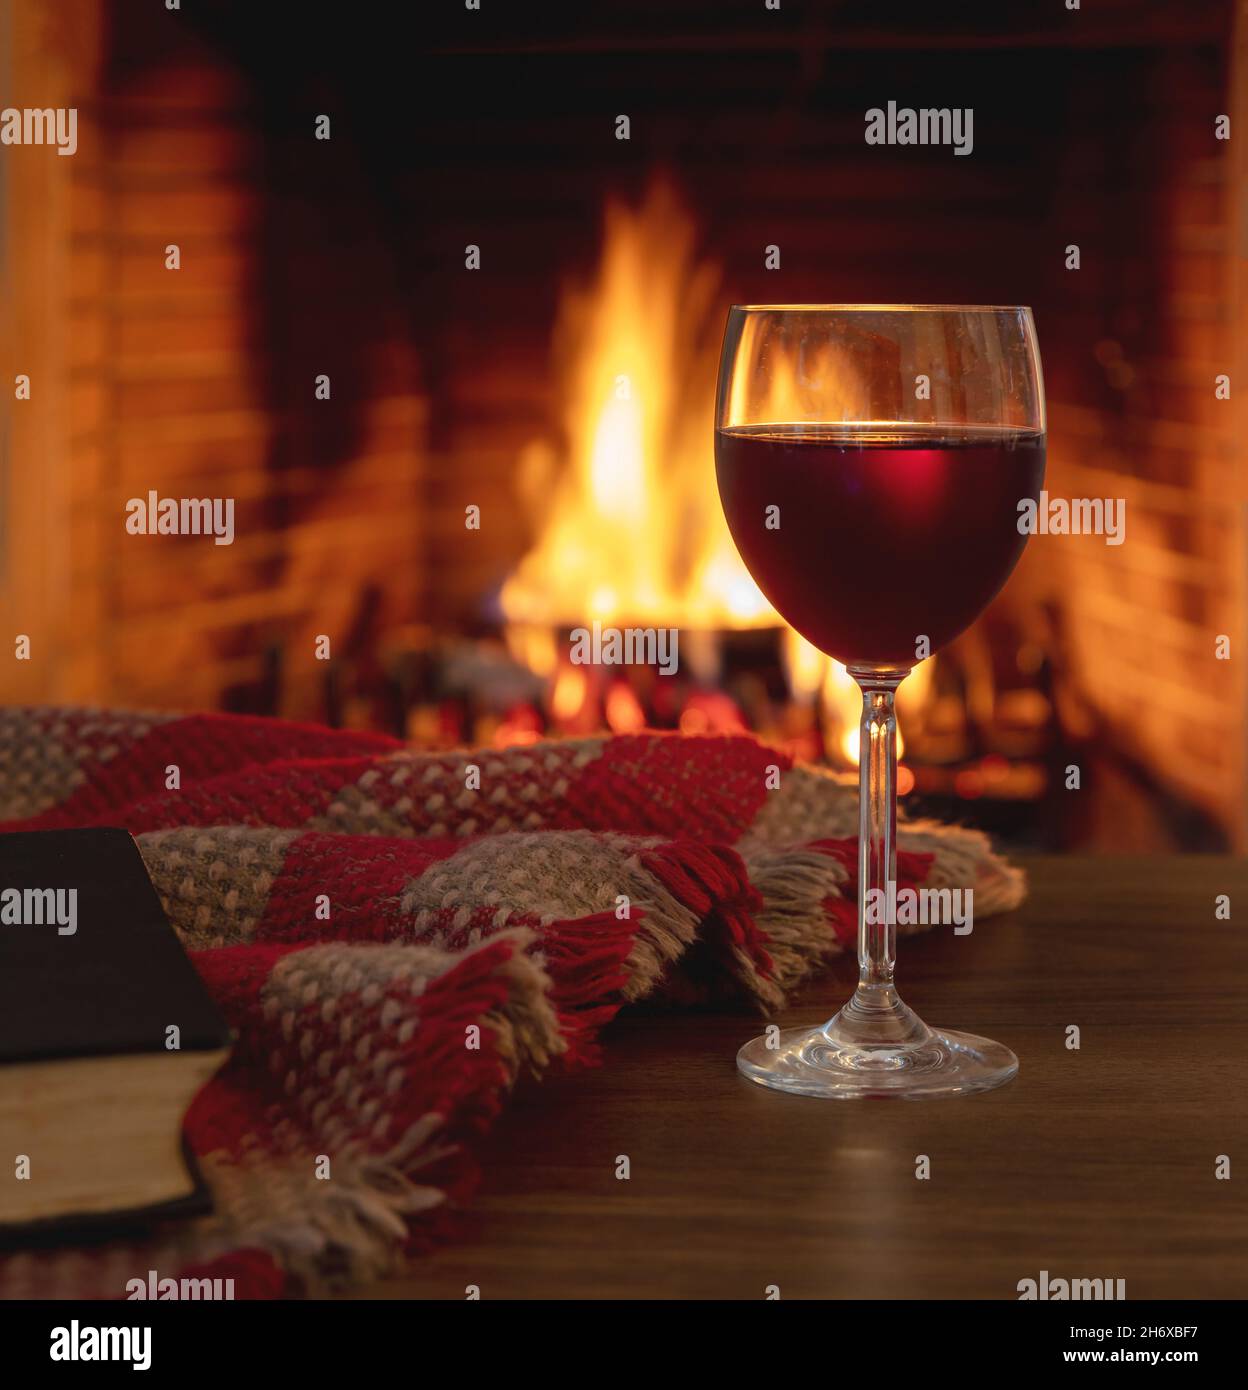 https://c8.alamy.com/comp/2H6XBF7/red-wine-glass-against-burning-fireplace-background-winter-holidays-relaxation-cozy-warm-home-interior-2H6XBF7.jpg